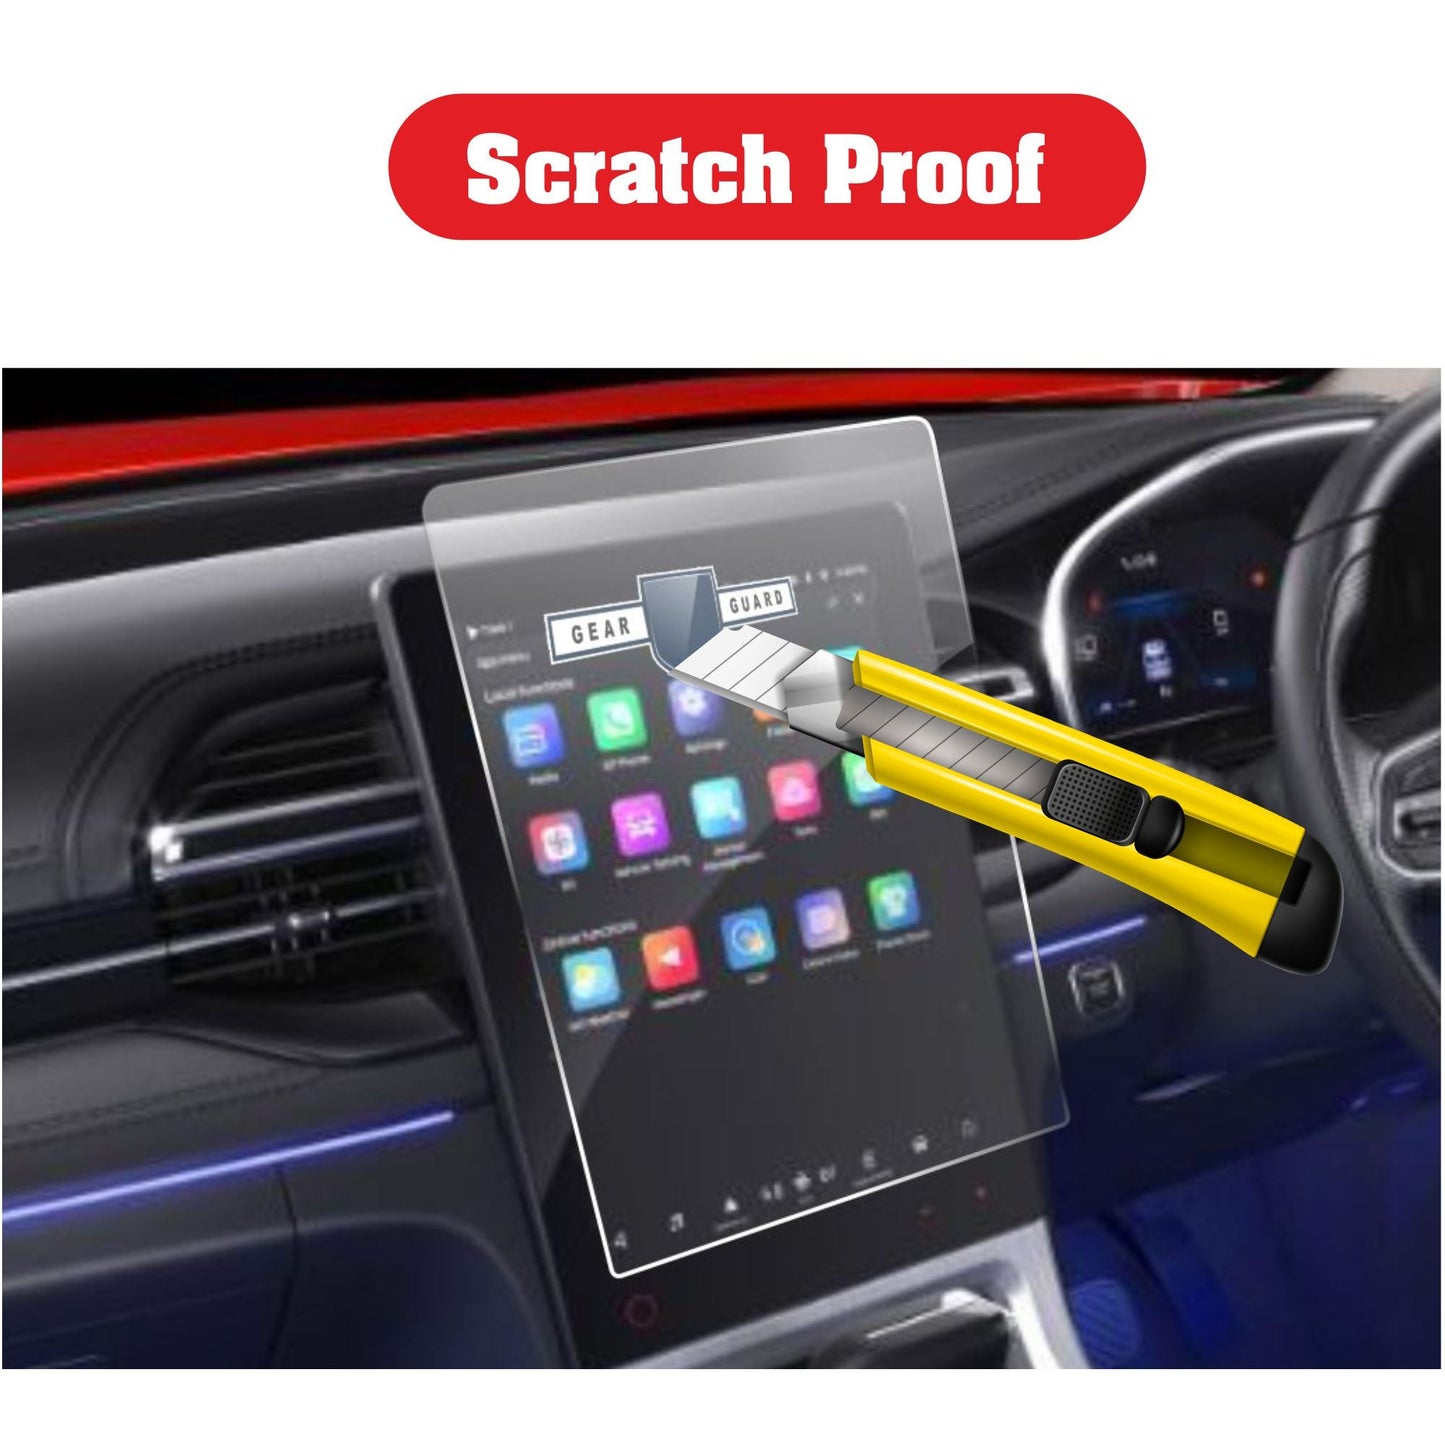 MG Hector Facelift 2023 Accessories Touch Screen Guard -HECTOR _FACELIFT